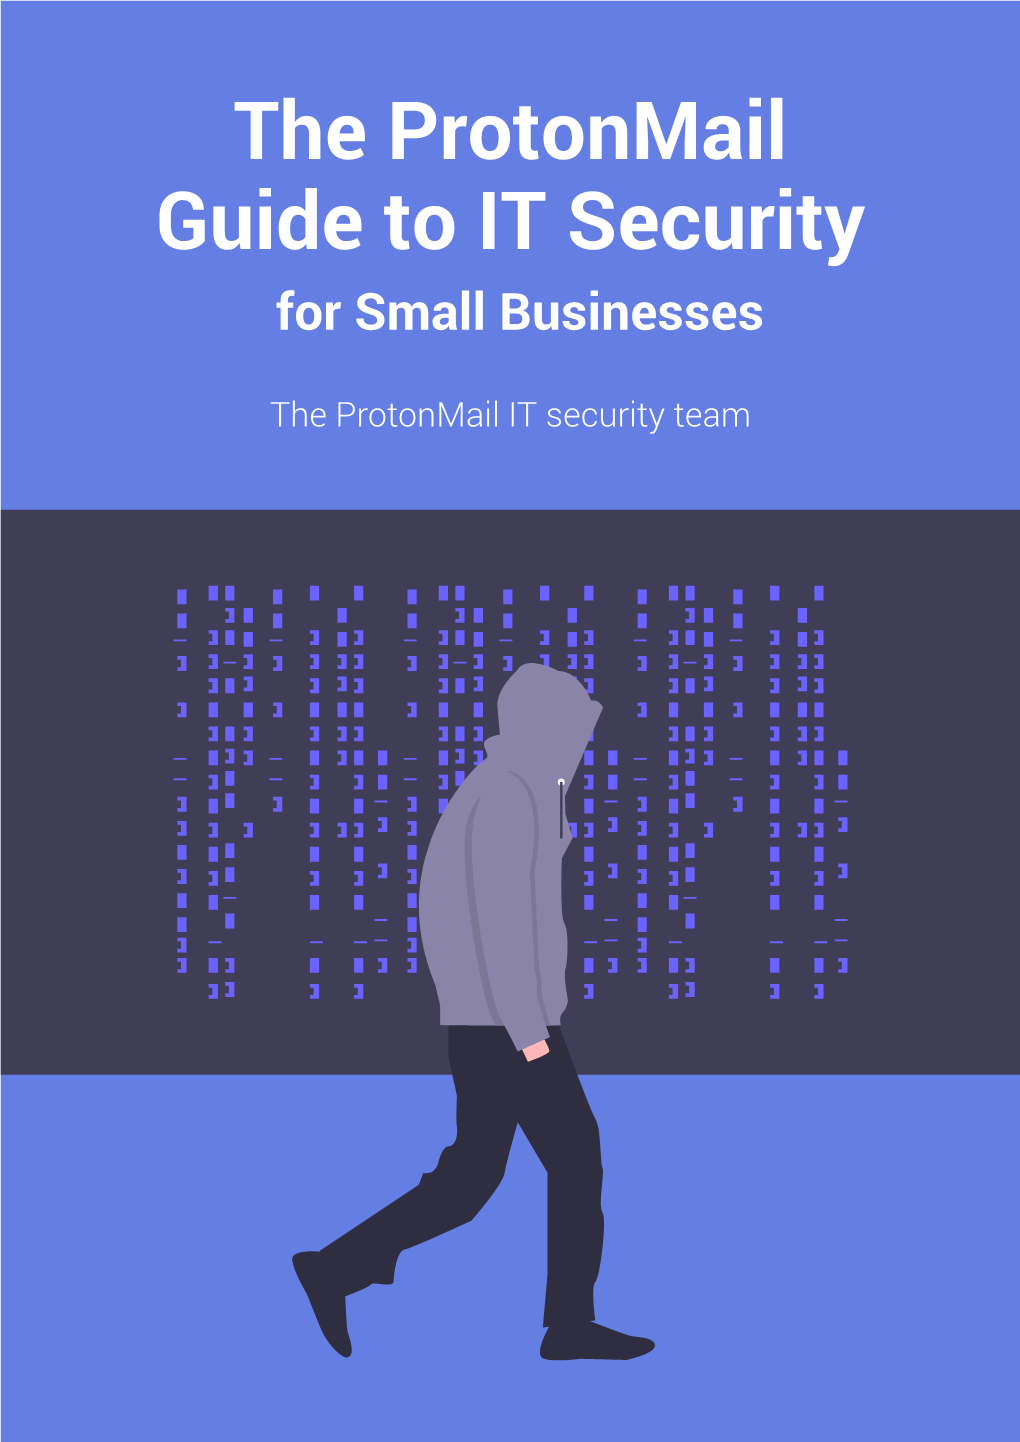 The Protonmail Guide to IT Security for Small Businesses